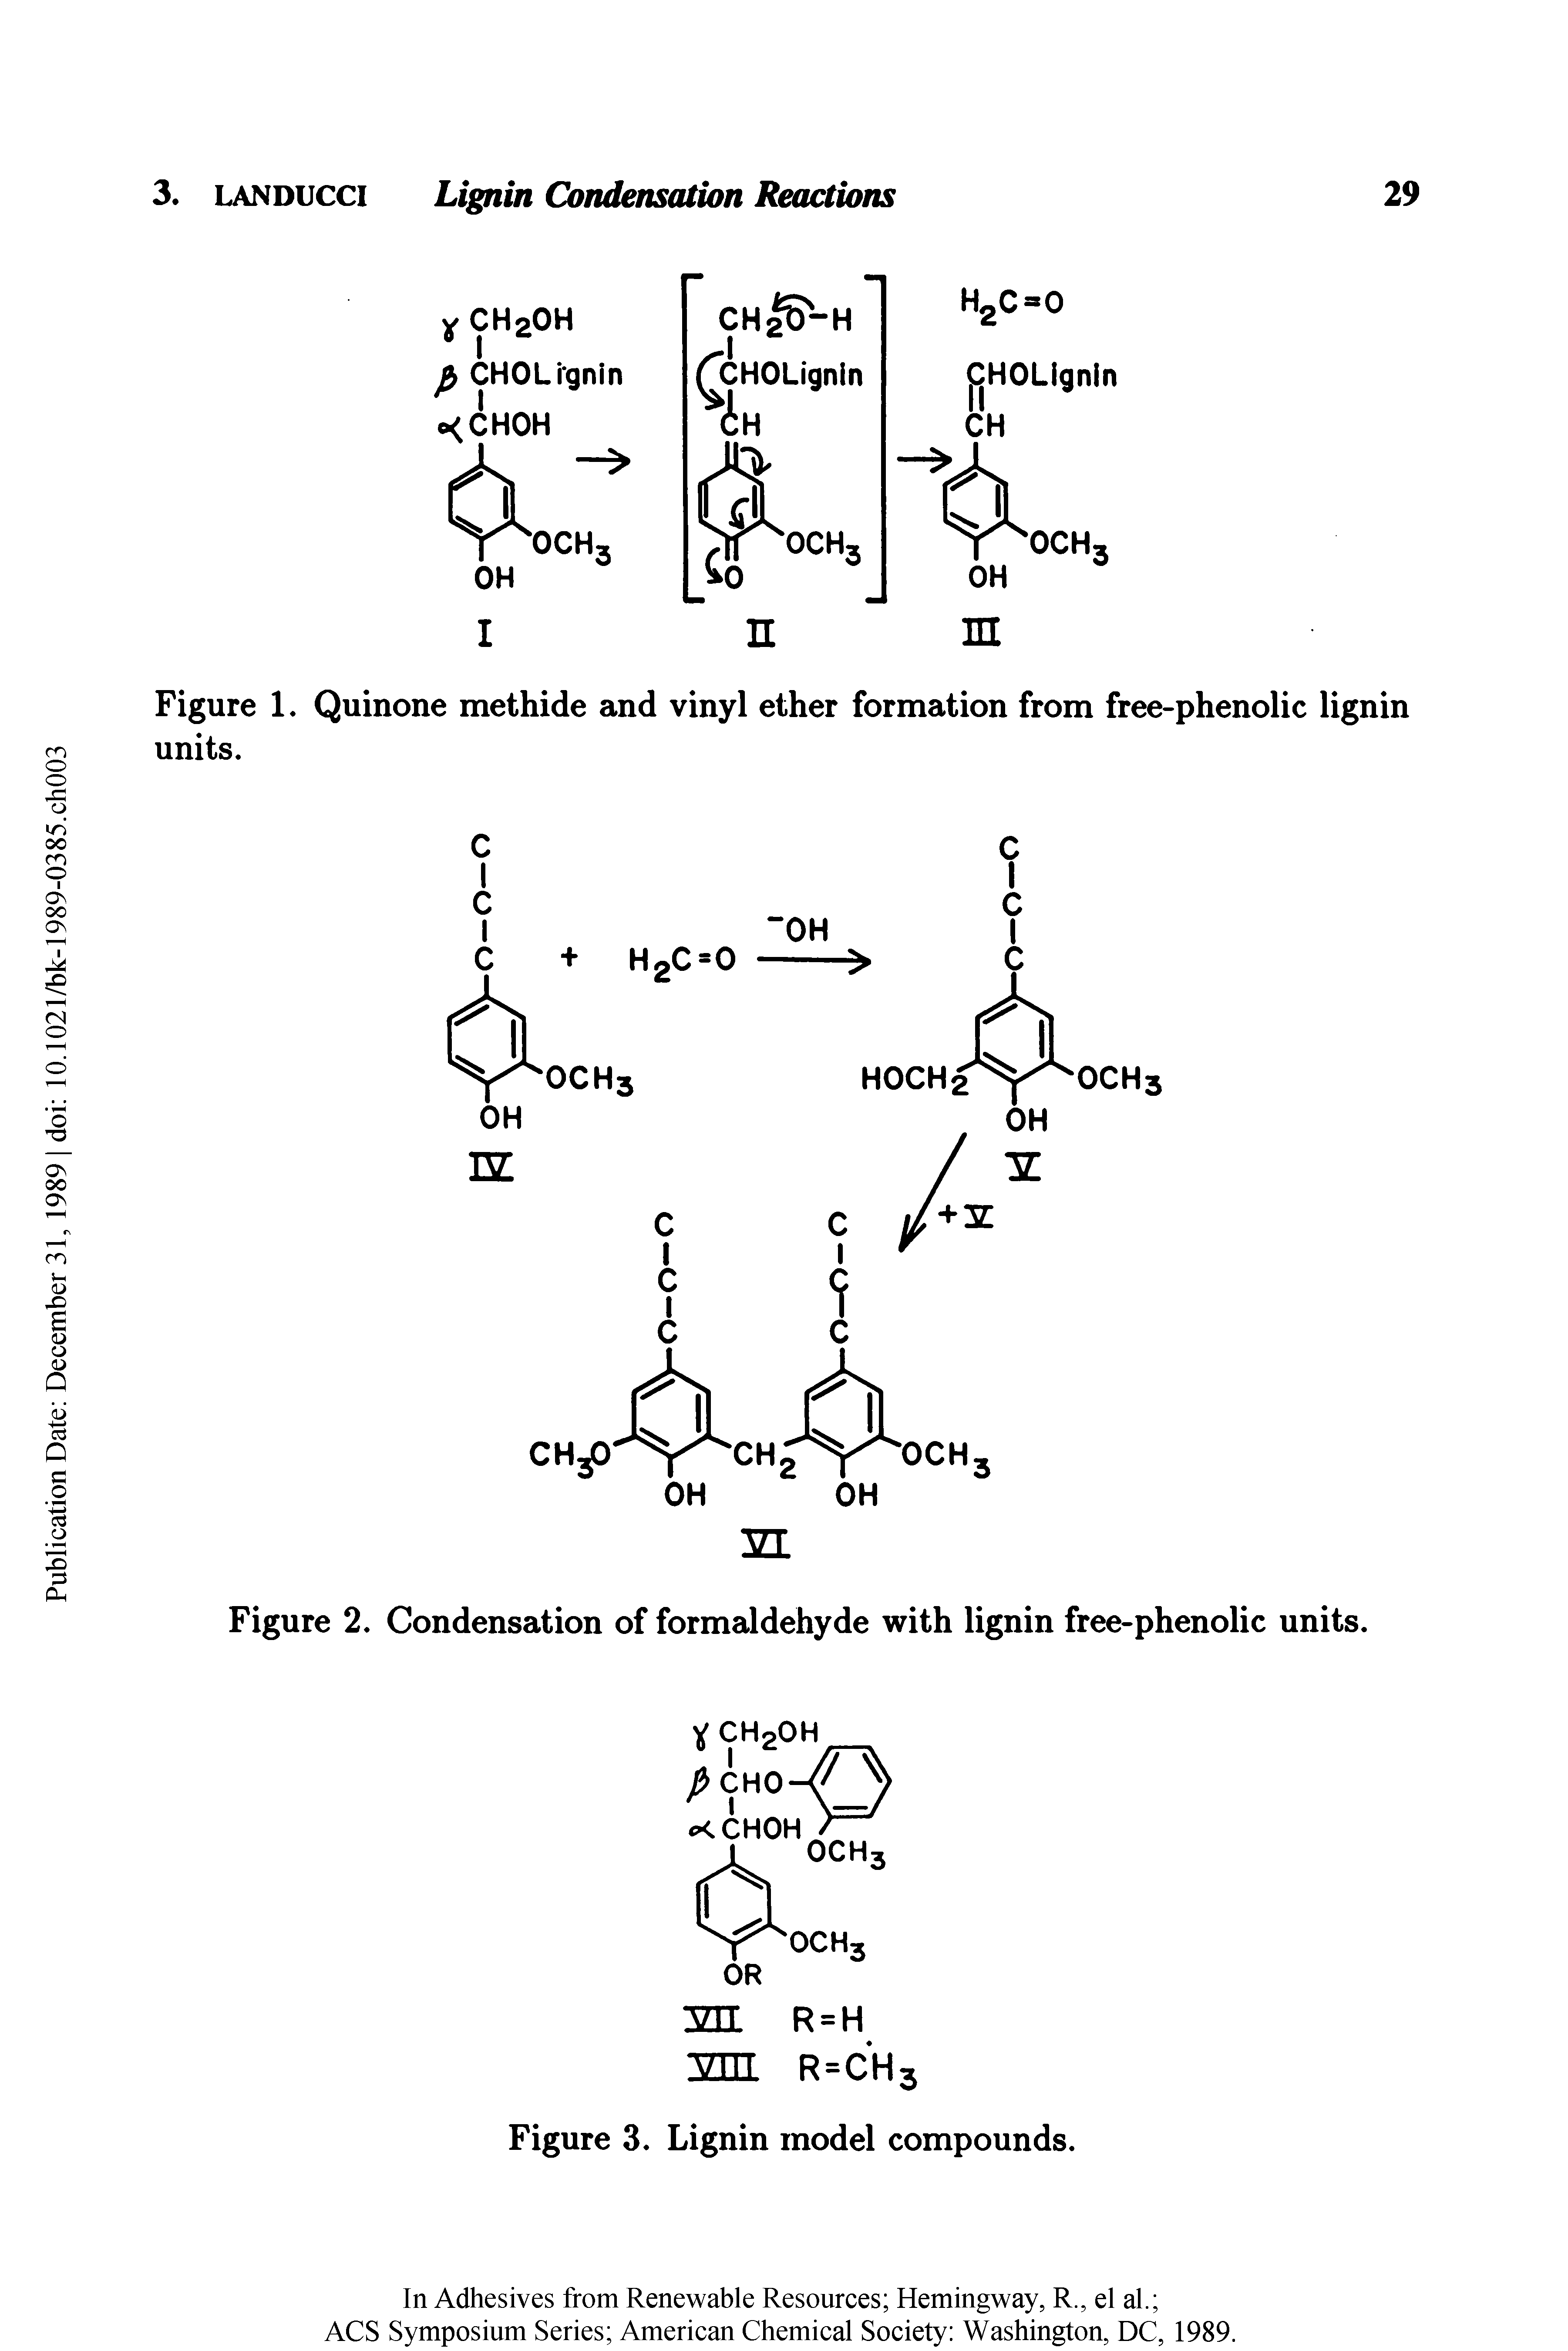 Figure 2. Condensation of formaldehyde with lignin free-phenolic units.